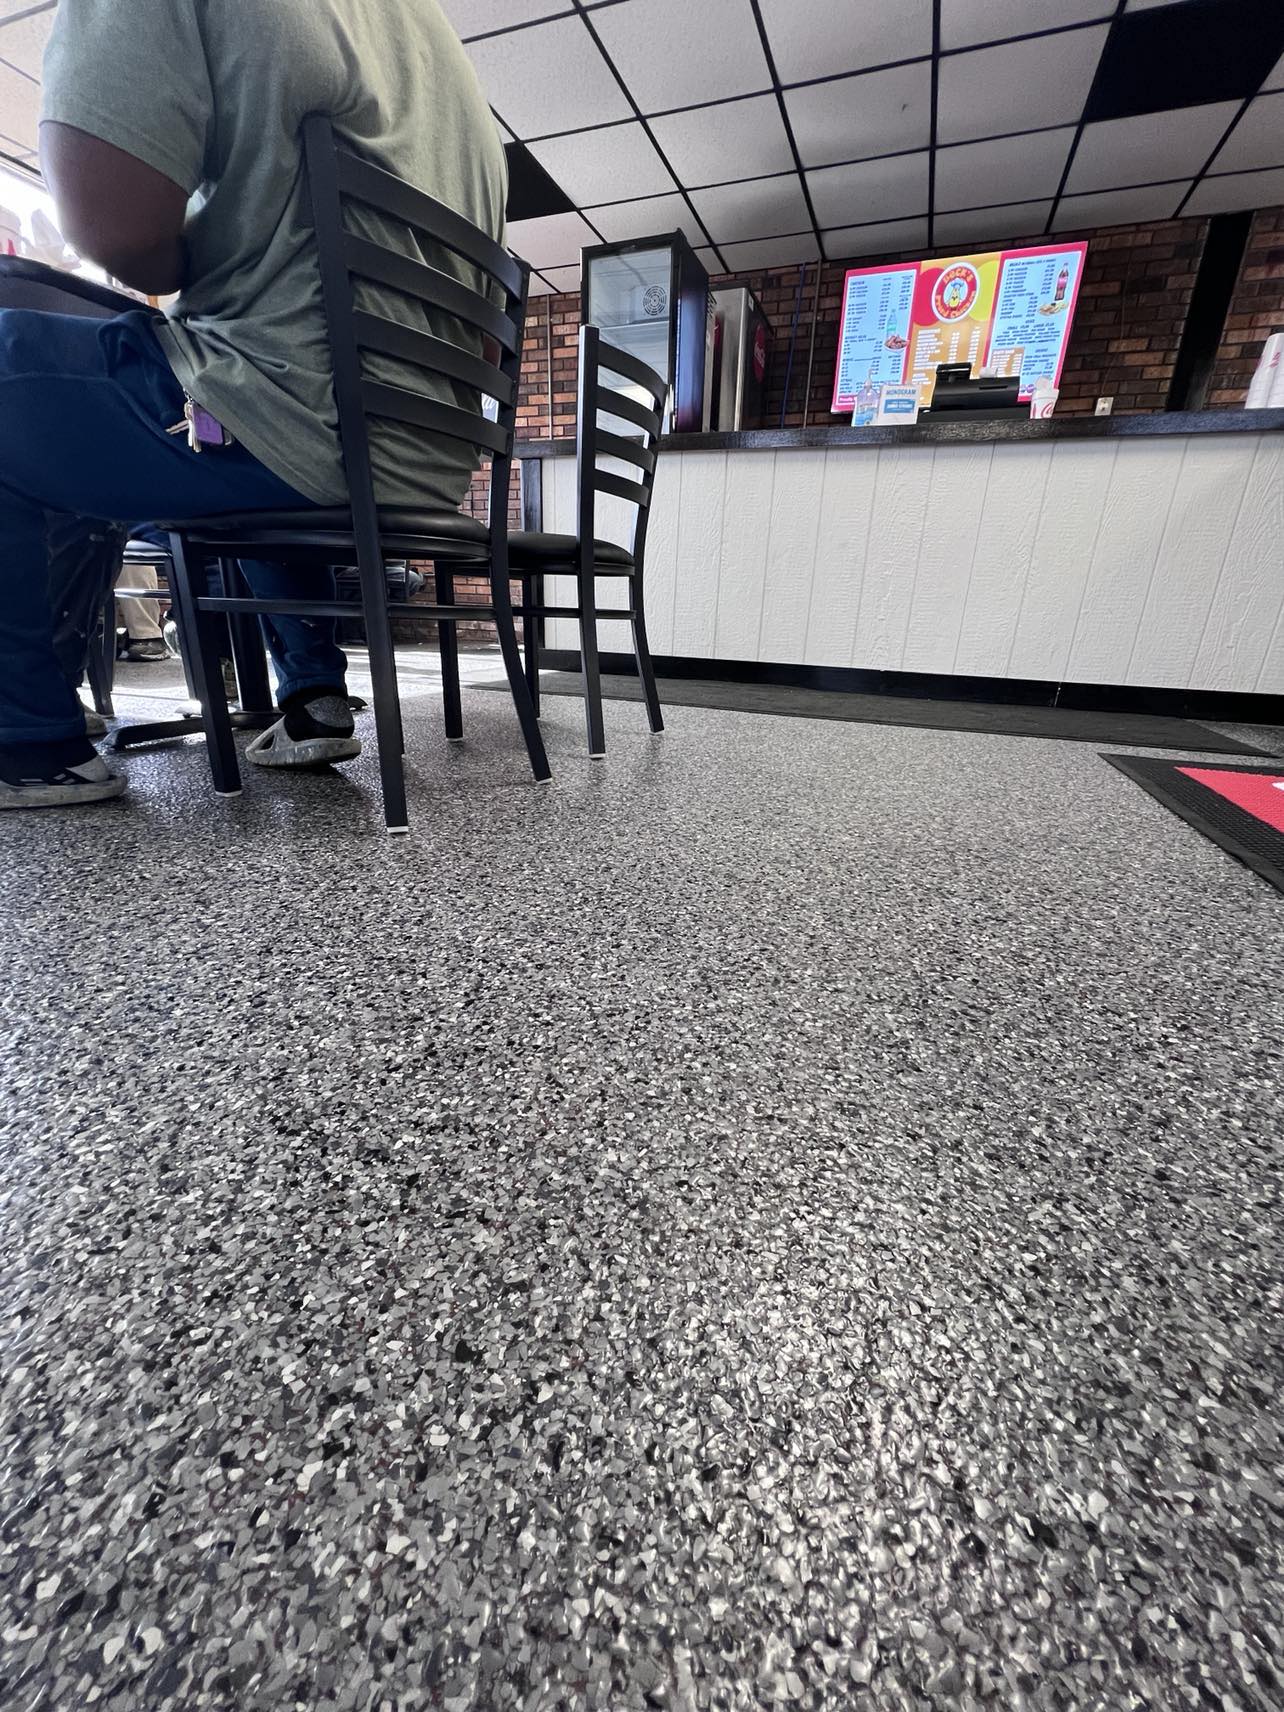 Revamping Restaurant Avesthetics A Complete Guide to Epoxy Floor Coating with Nightfall Flakes for a Restaurant Lobby in Kentwood LA 2